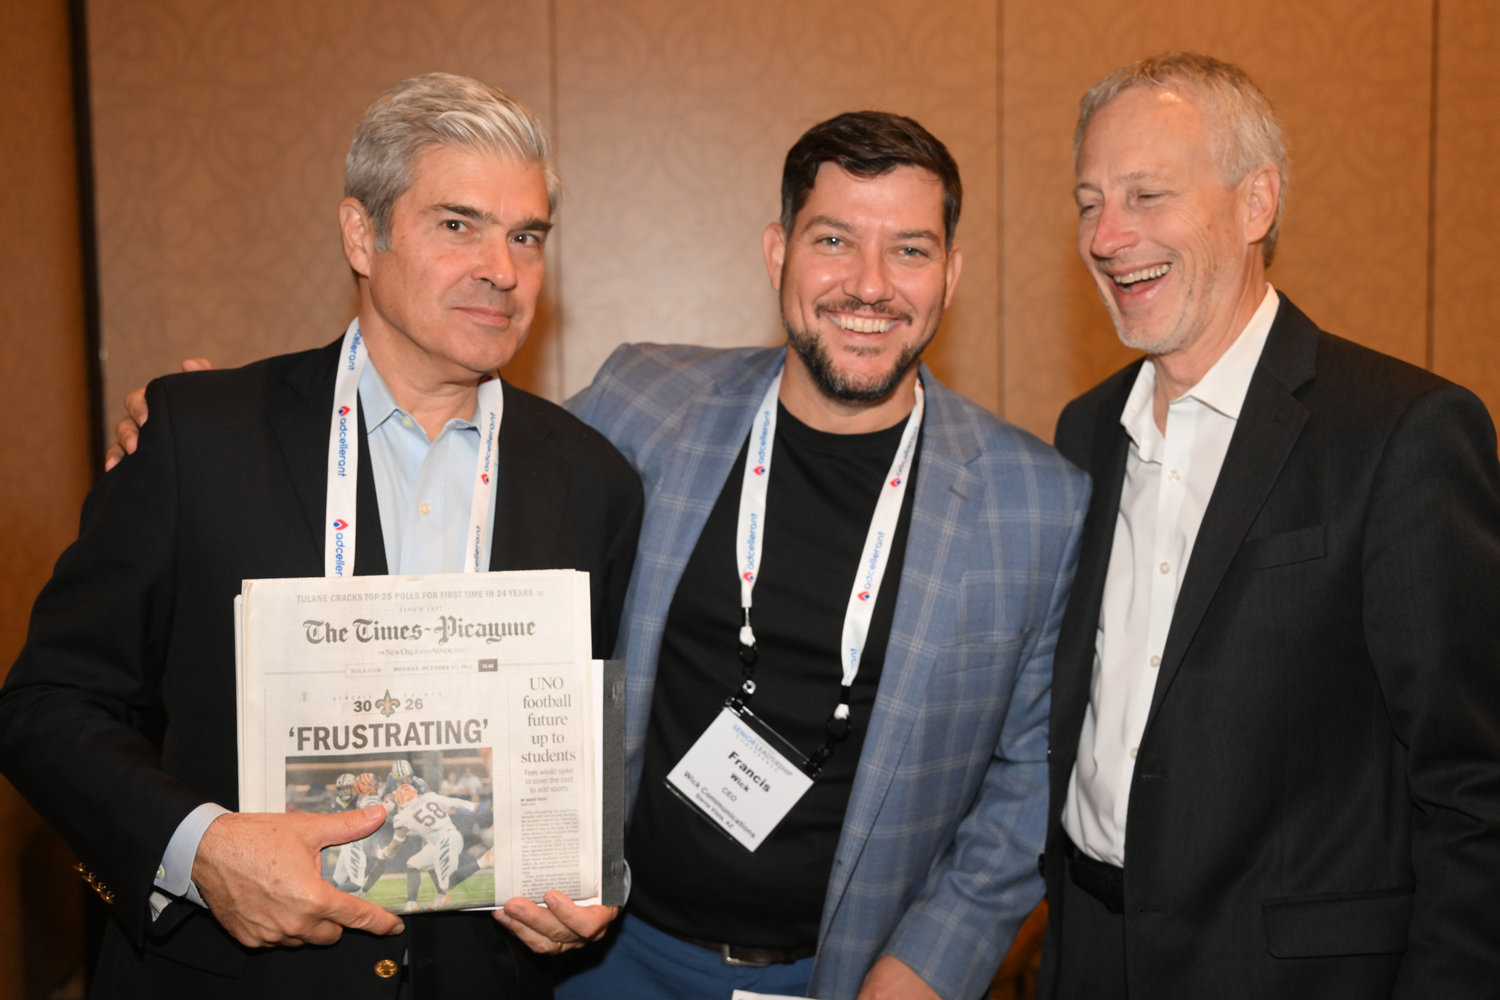 A frustrating loss for the New Orleans Saints on the opening weekend of the Senior Leadership Conference – Bill Nutting, vice president of Ogden Newspapers; Francis Wick, CEO of Wick Communications; and Dean Ridings, CEO of America's Newspapers. (Photo by Jeff Strout)